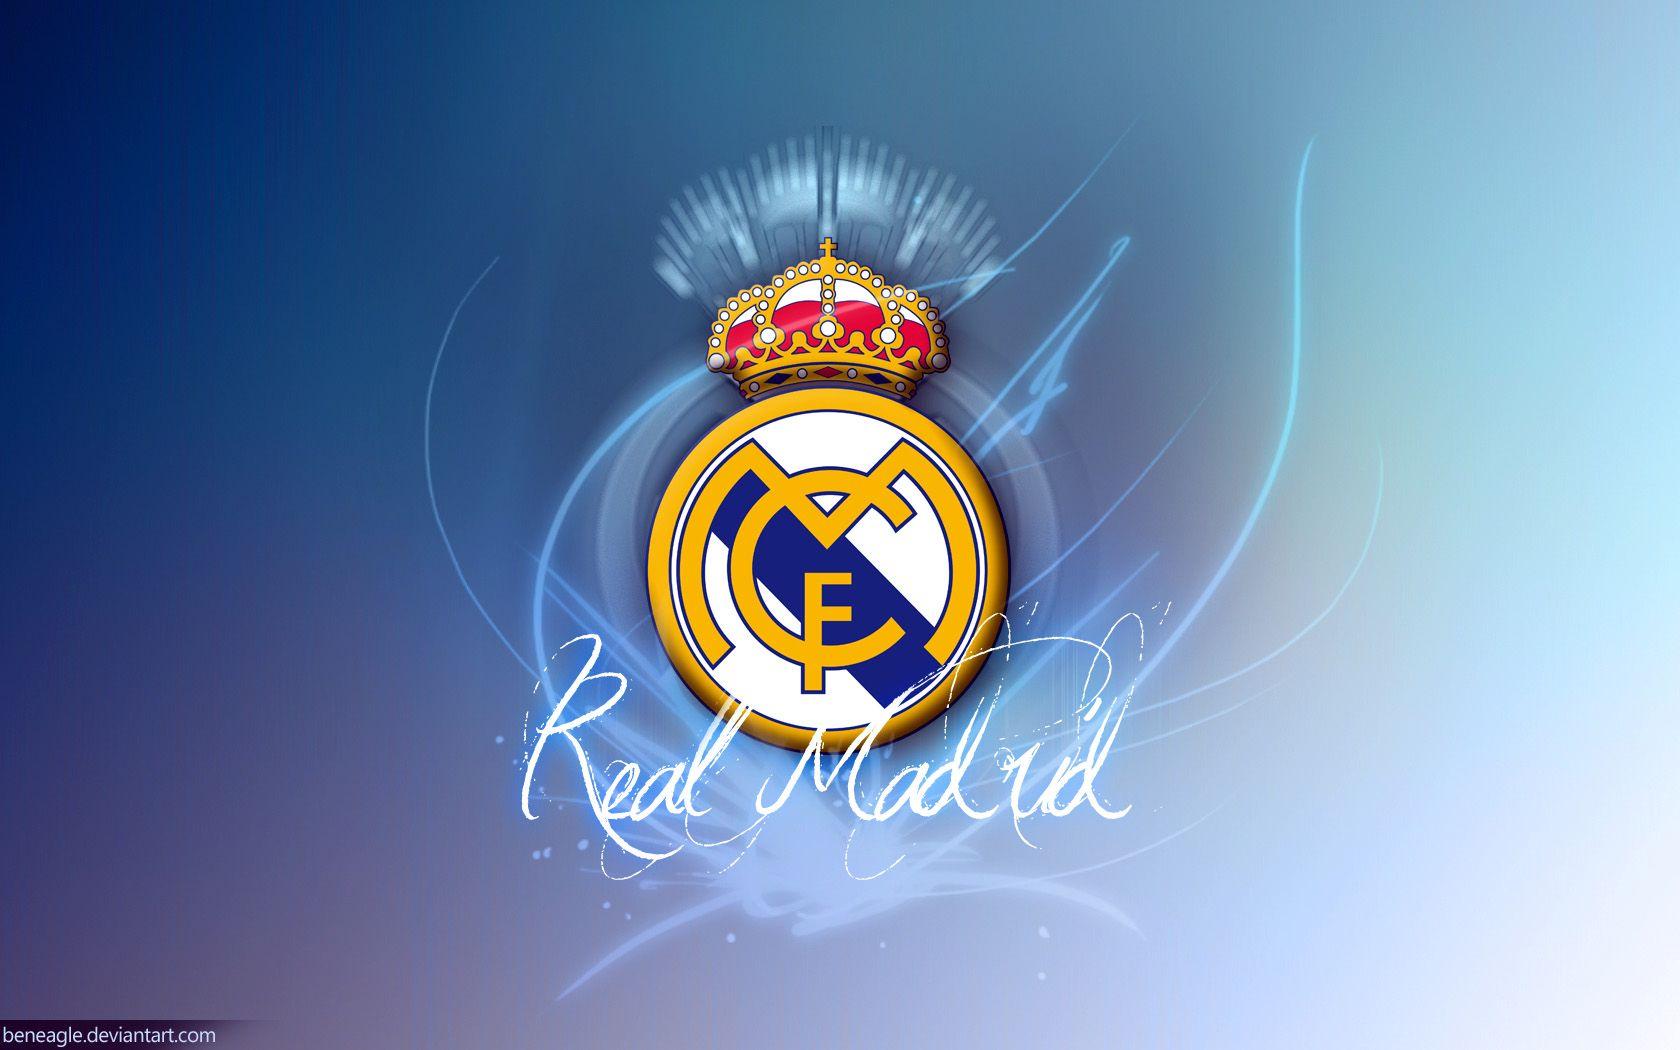 real madrid logo wallpapers hd wallpapers hd download free backgrounds